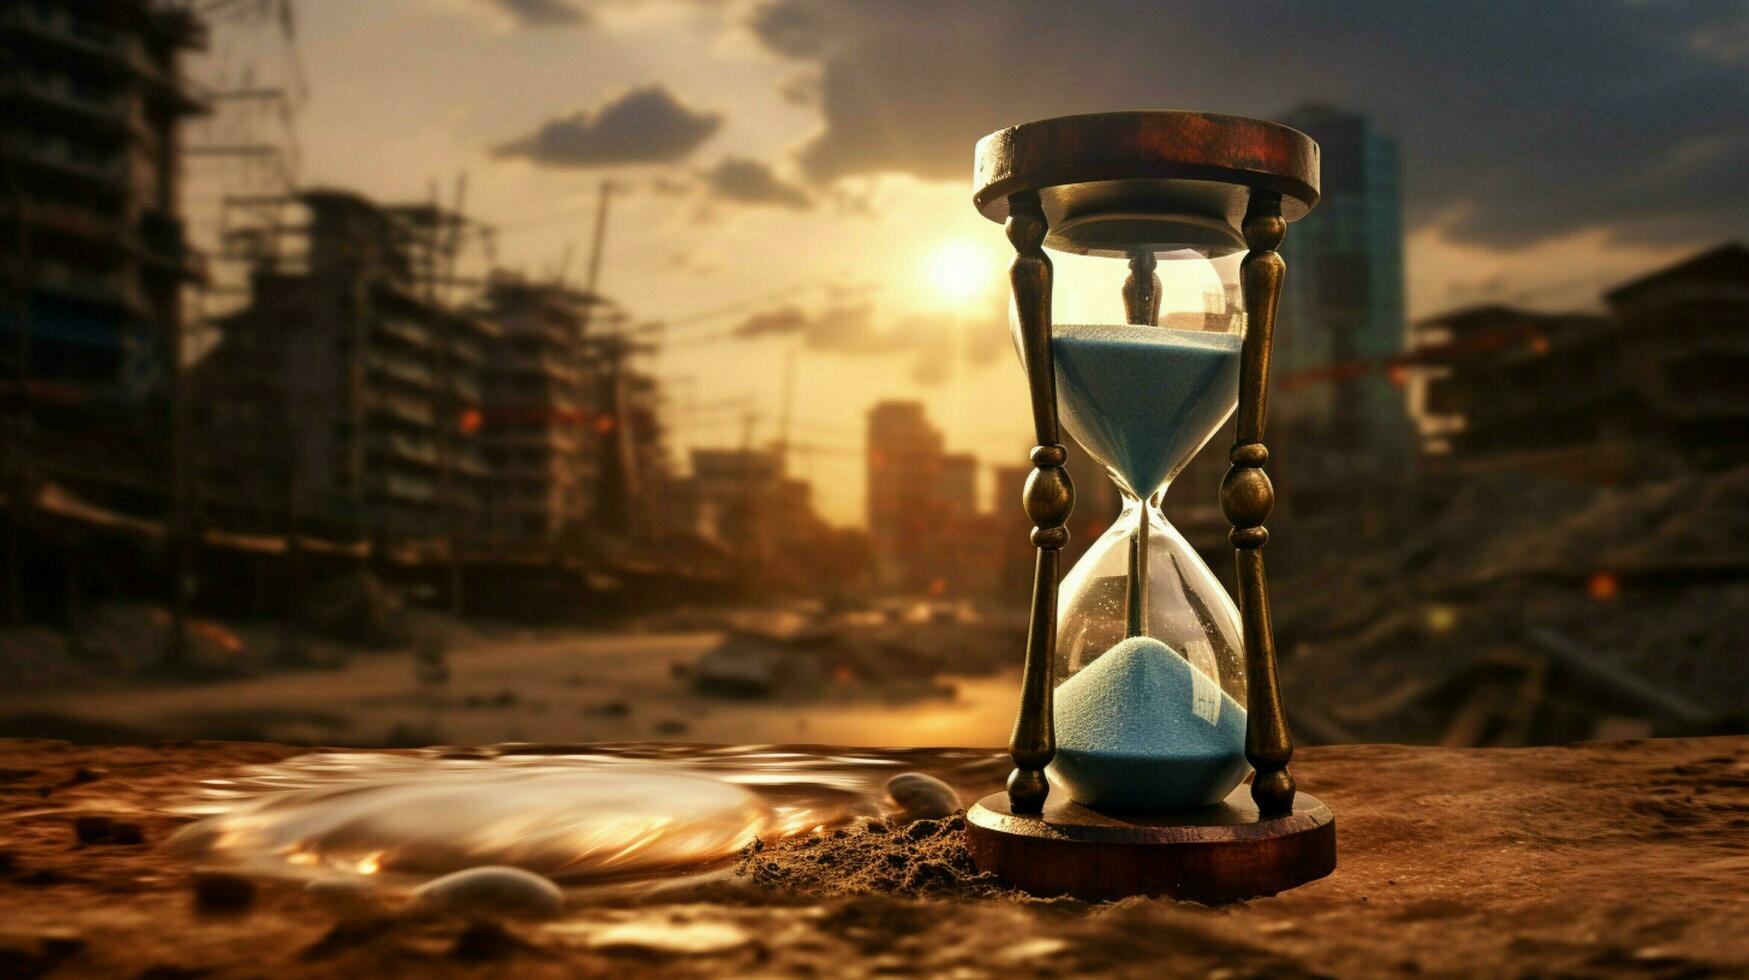 old hourglass in the street scene photo